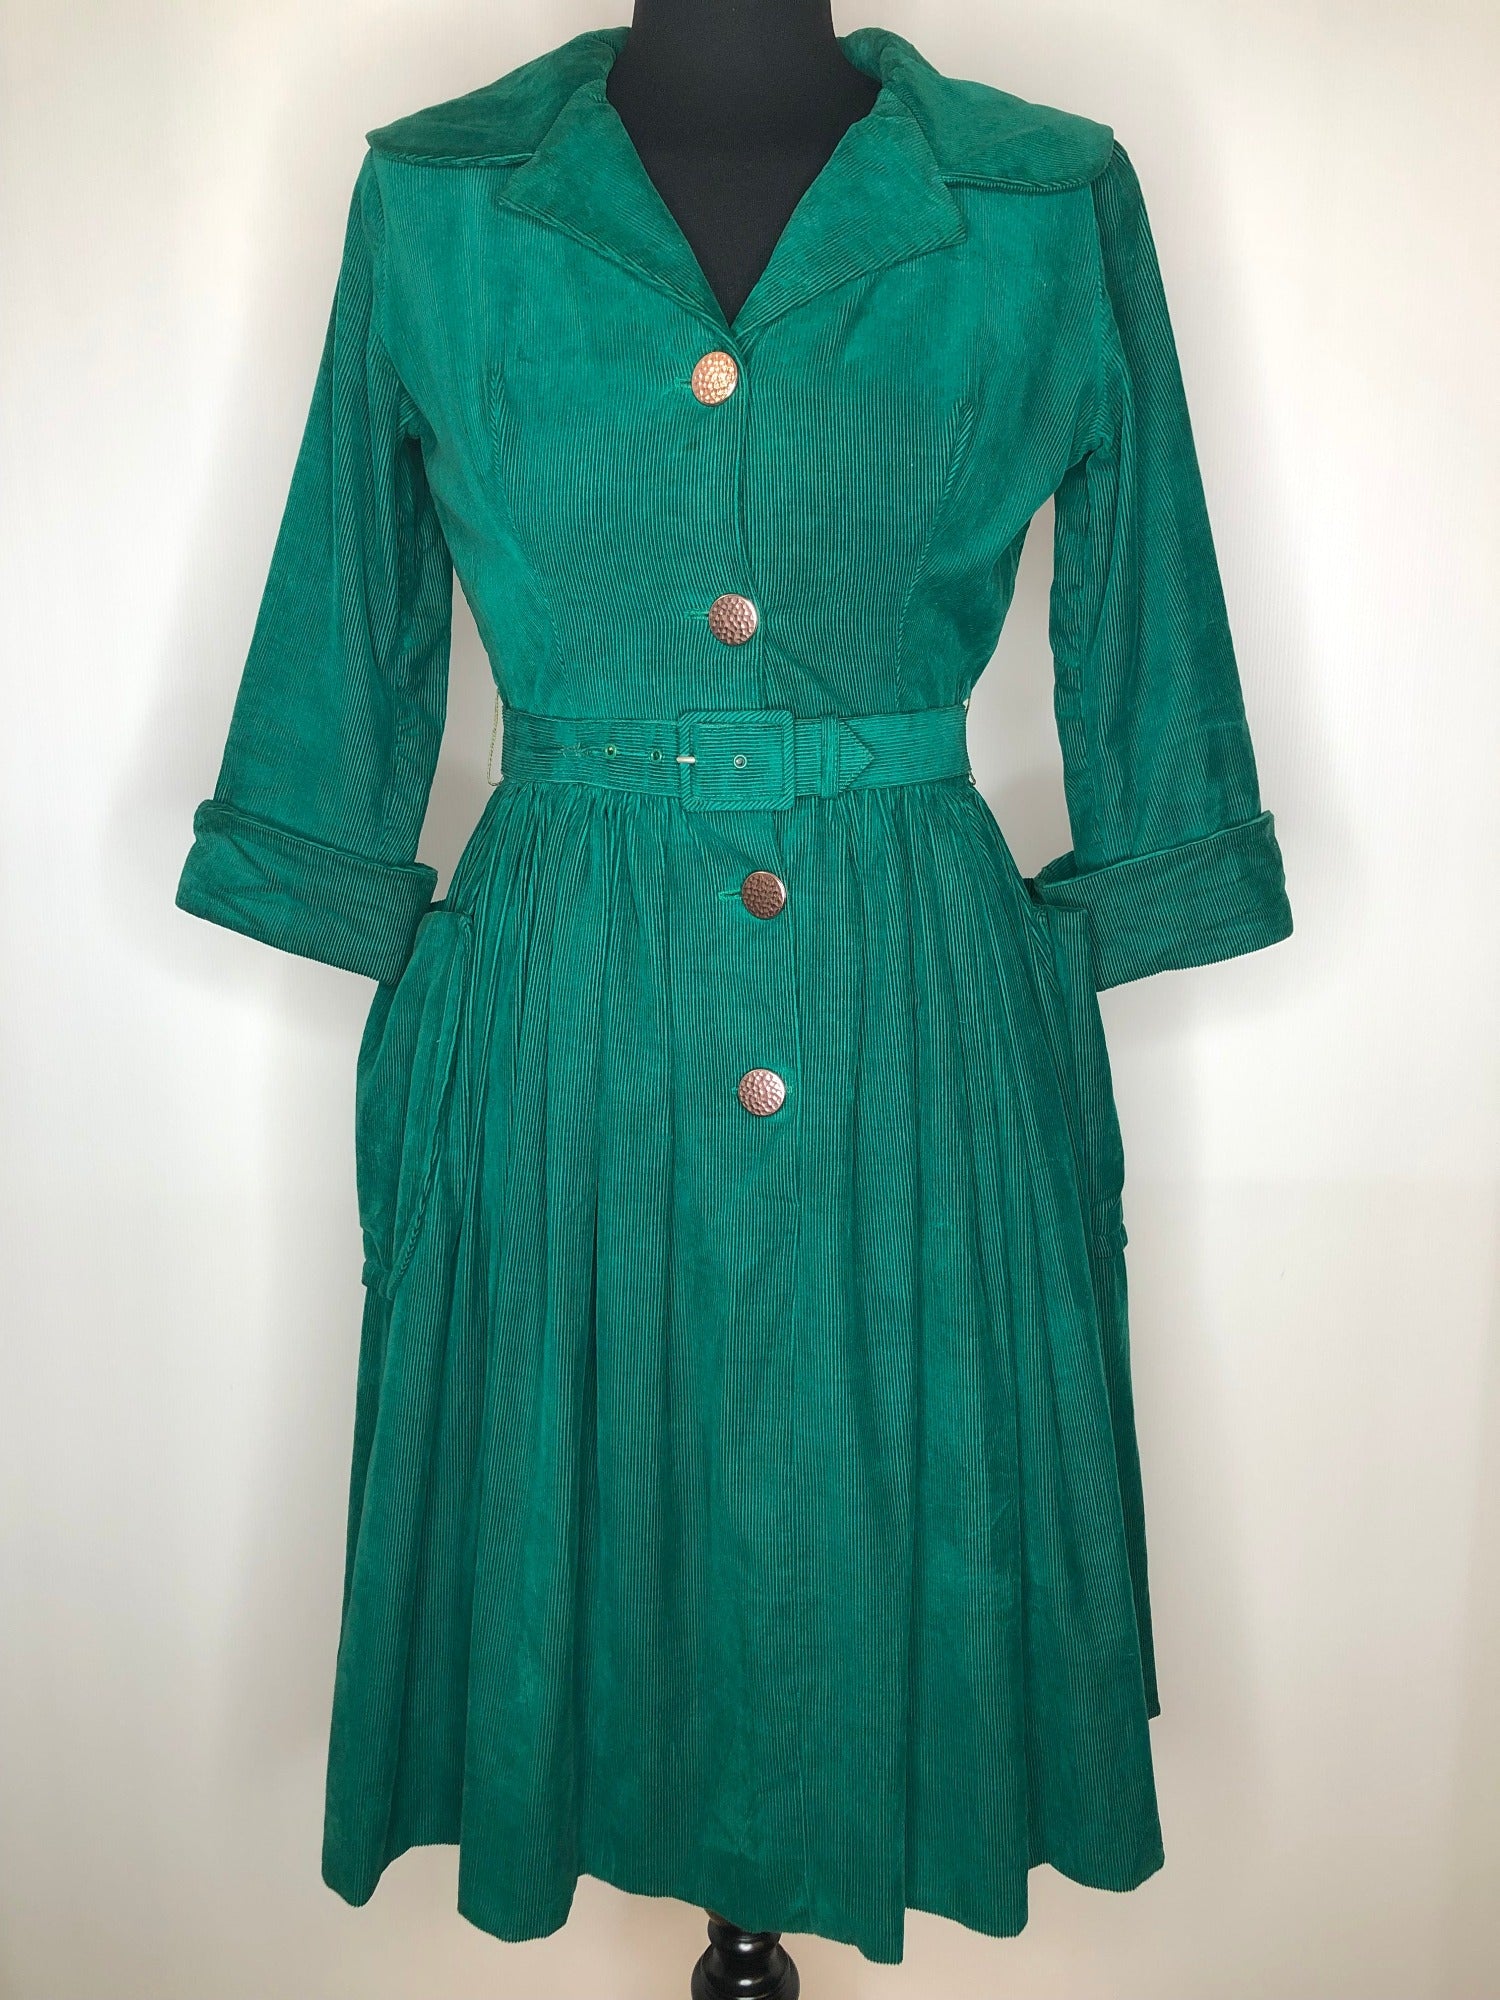 vintage  urban village  purple  Melbray  green  full circle  floral  fitted waist  dress  day dress  corduroy  collared dress  button front  belted  50s  1950s  10